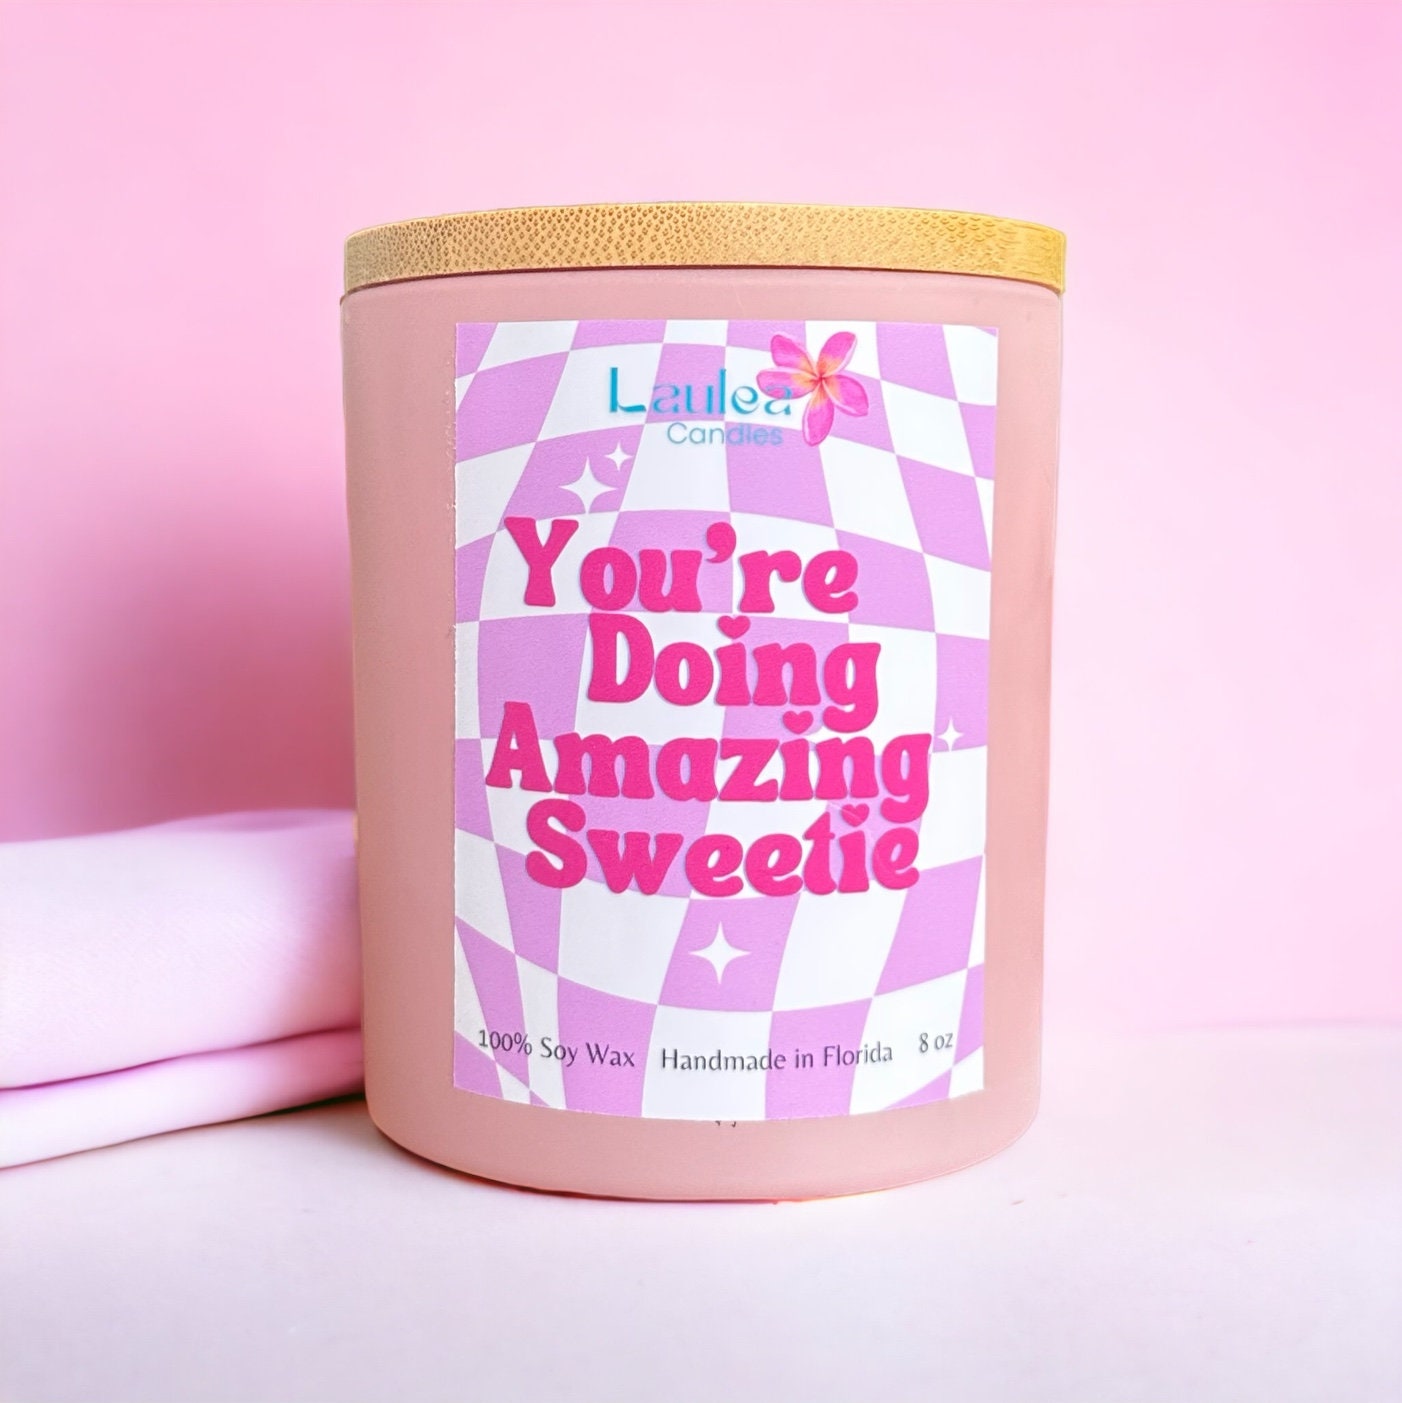 You’re doing amazing sweetie| disco soy wax candle| y2k decor| uplifting mental health get well pretty cute pink | pastel aesthetic groovy